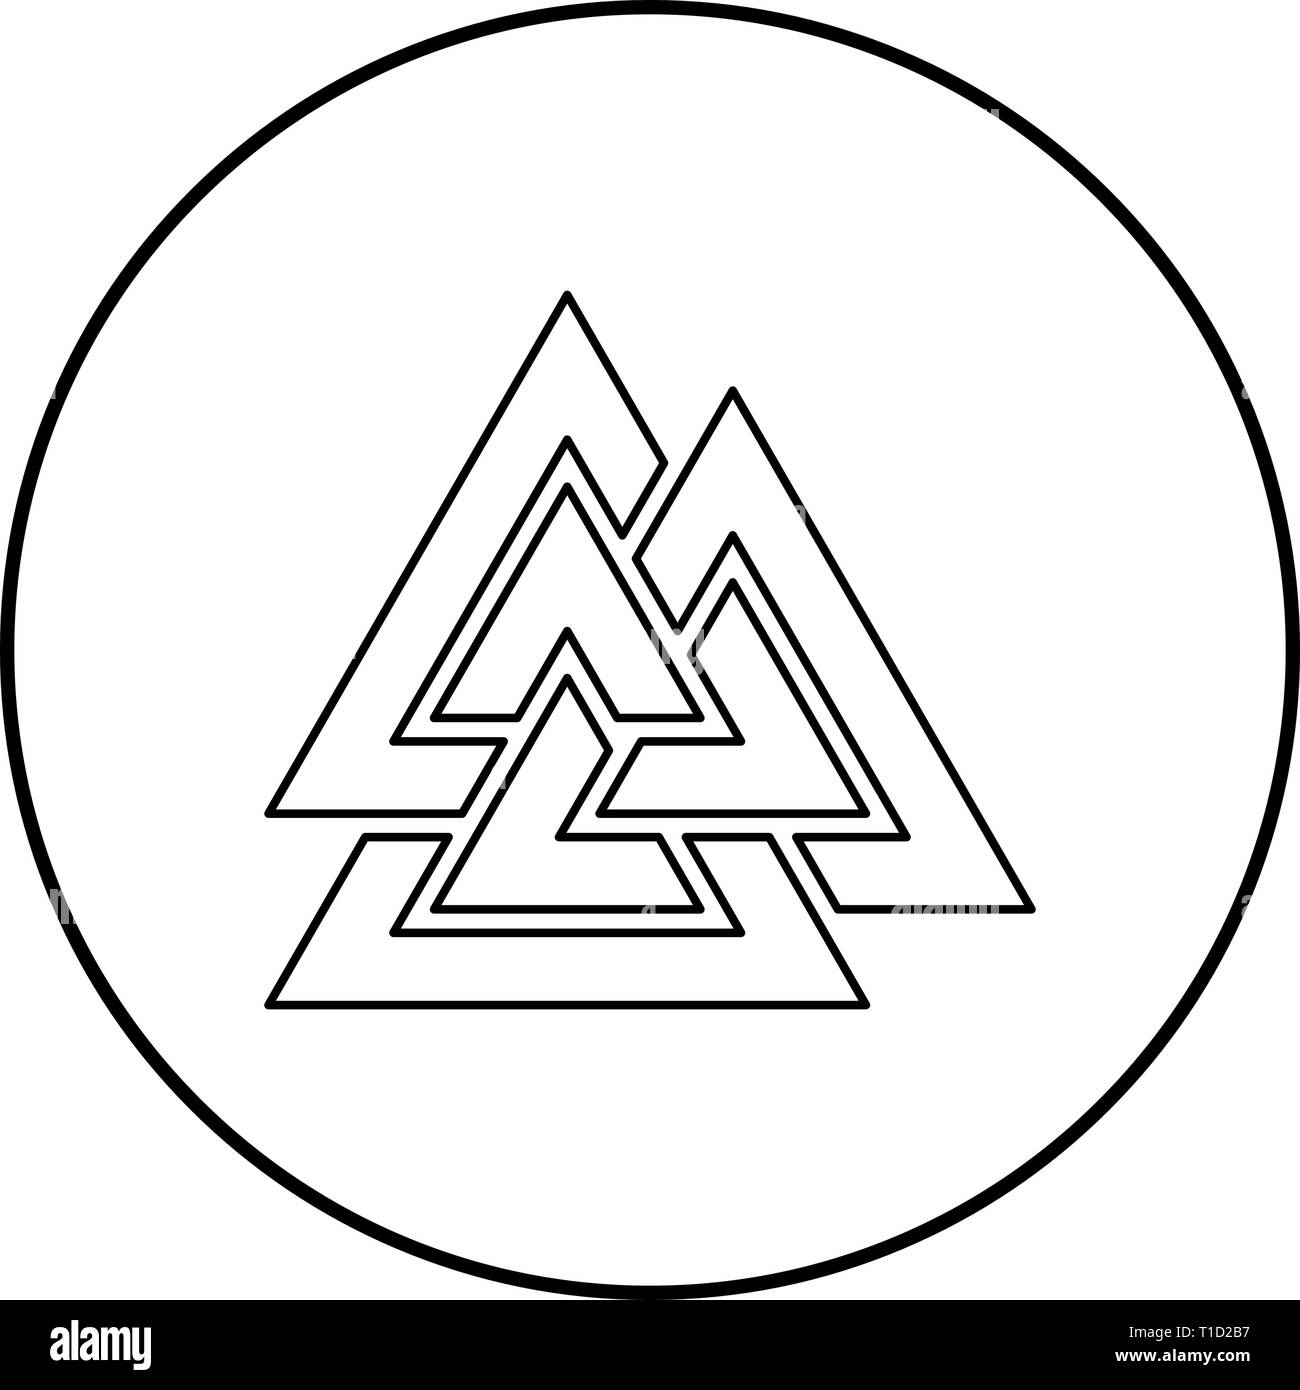 Valknut sign symblol icon outline black color vector in circle round illustration flat style simple image Stock Vector